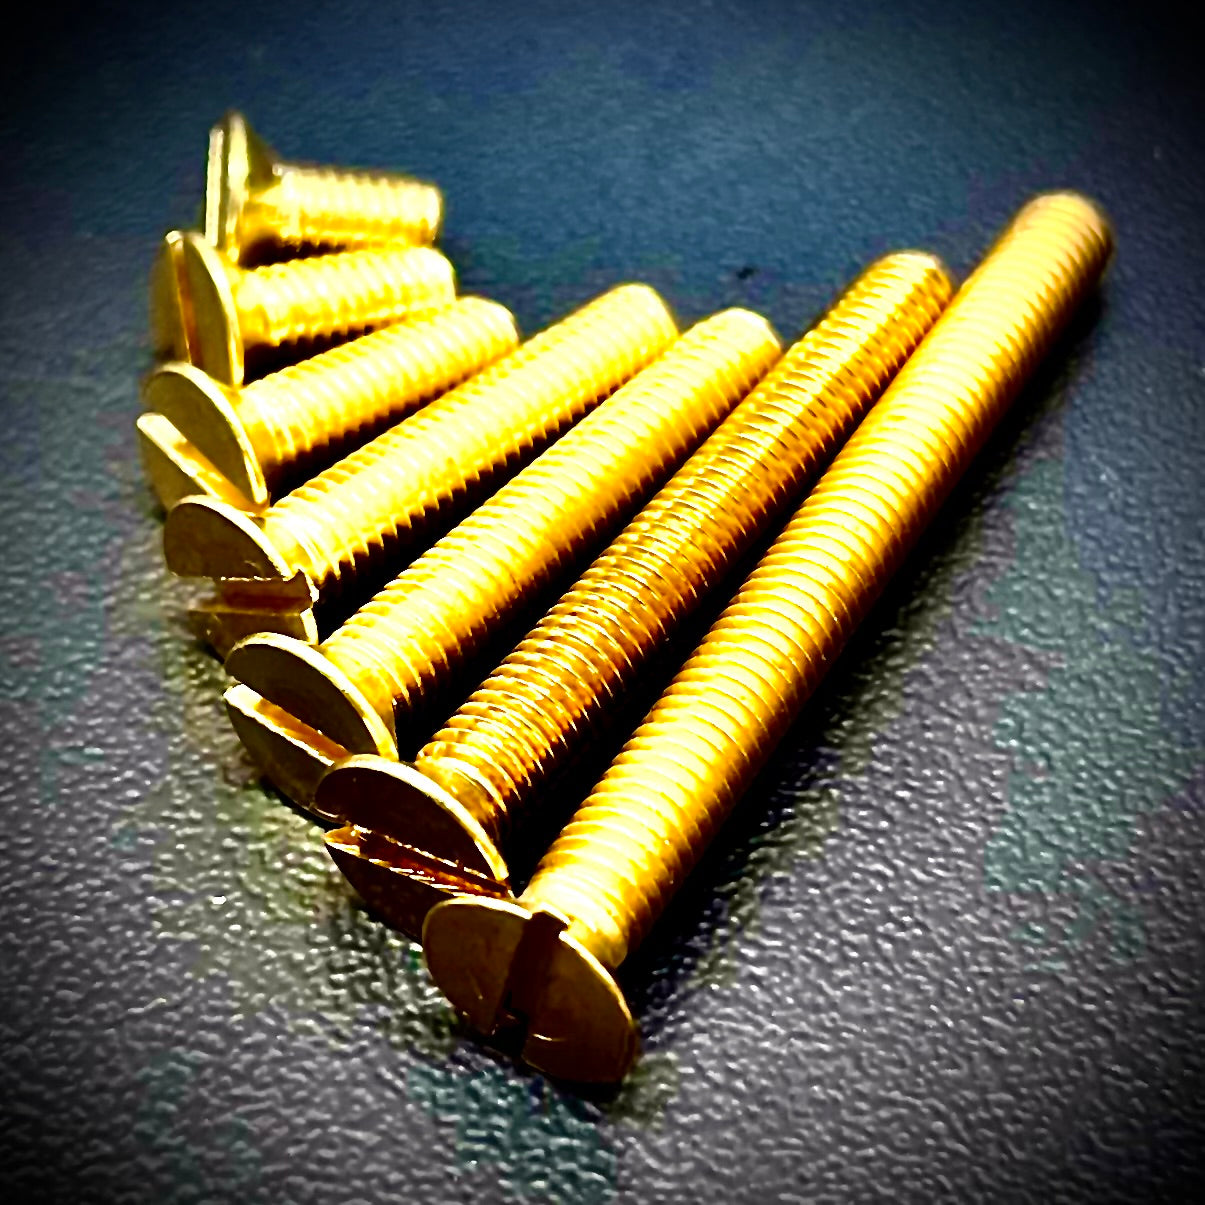 M6 Machine Screws Slotted Countersunk Brass DIN 963 - Fixaball Ltd. Fixings and Fasteners UK